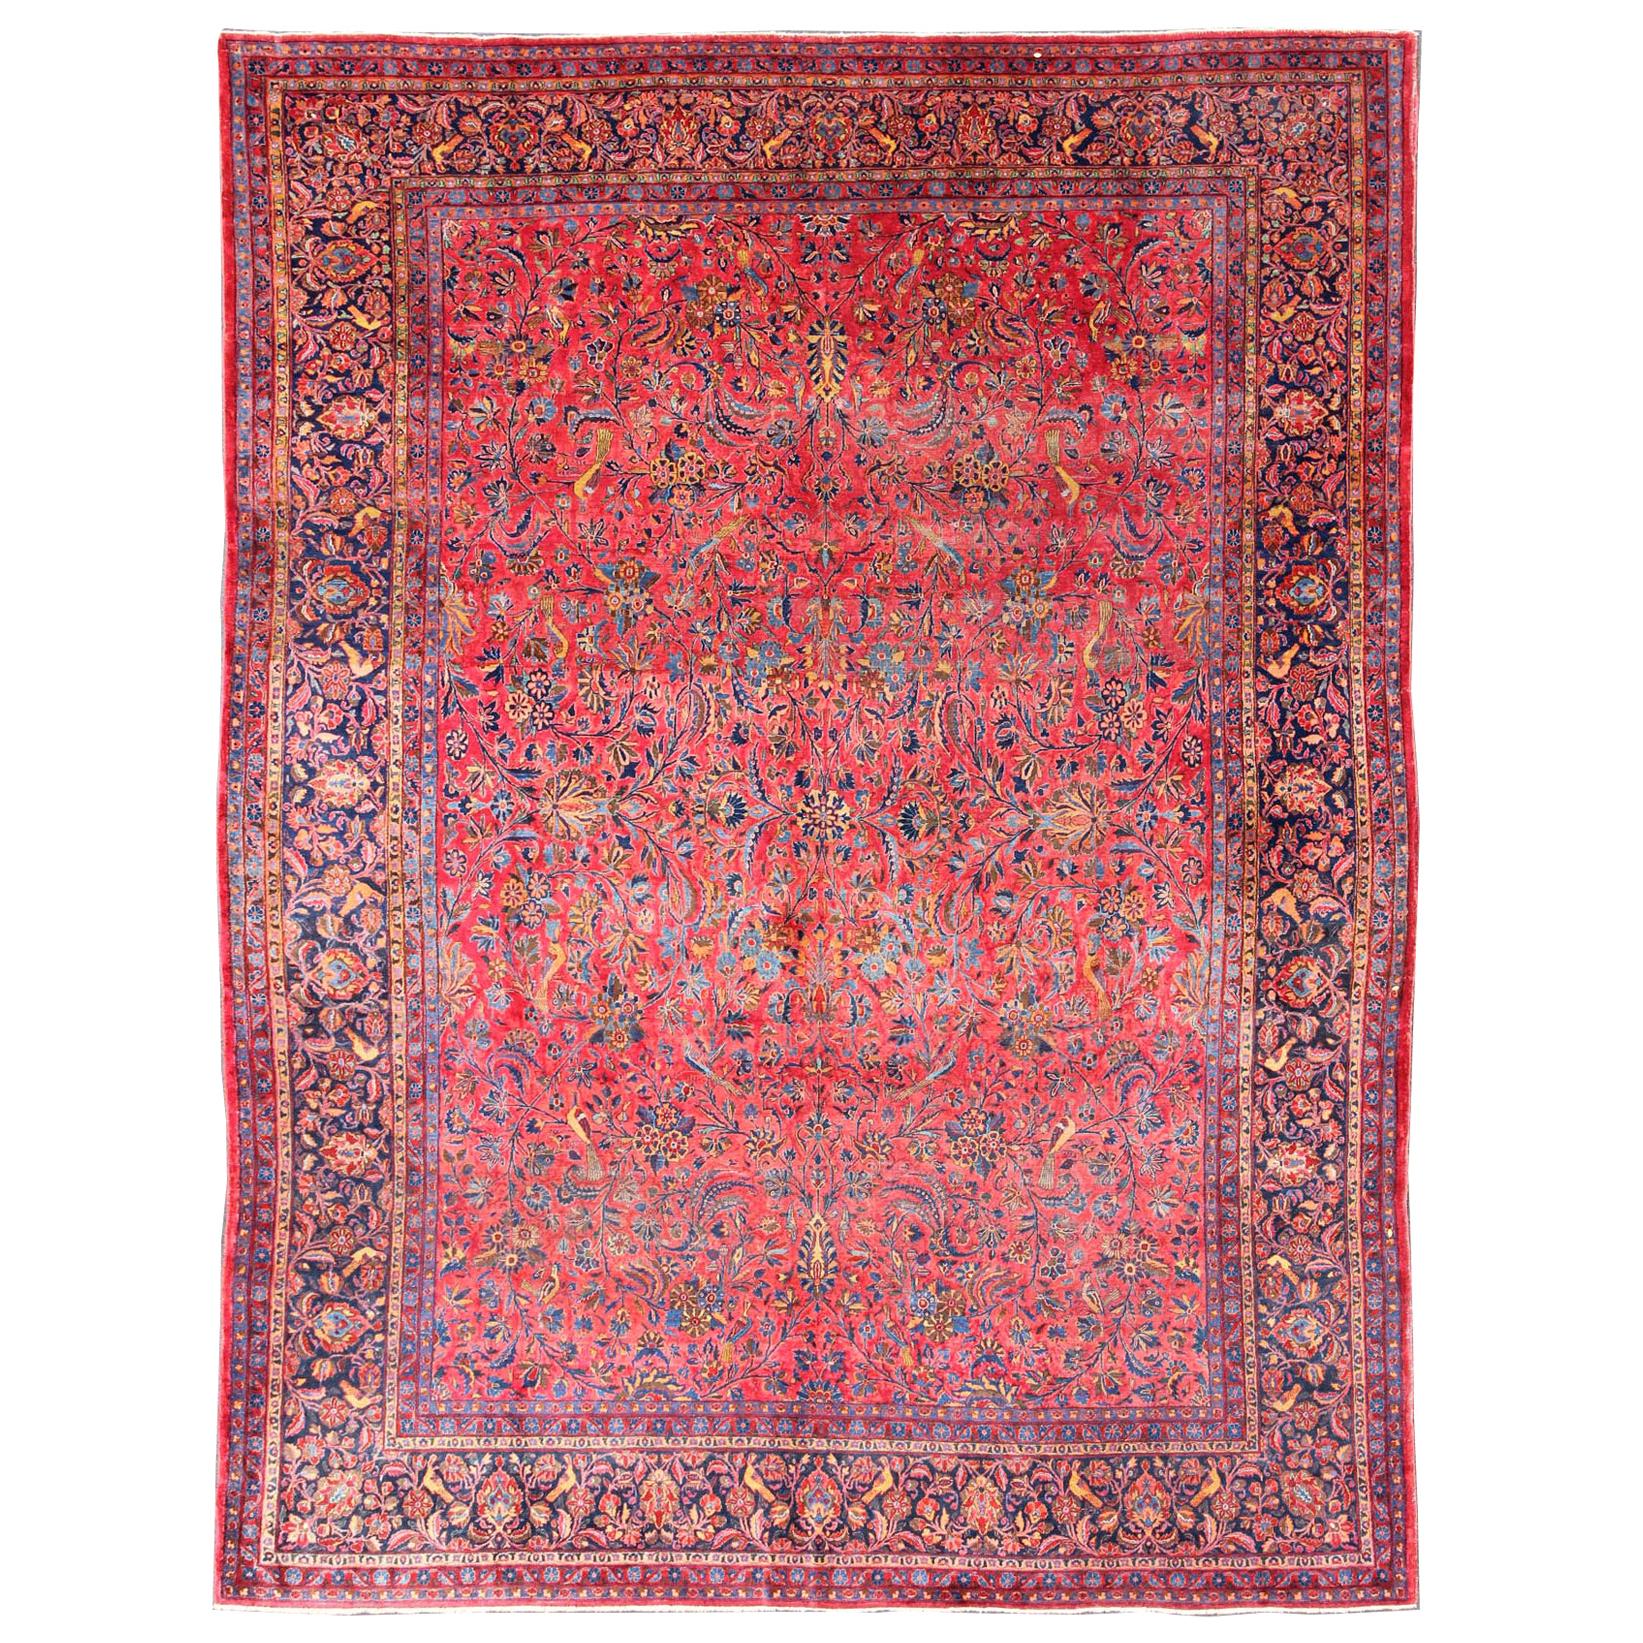 Antique Persian All-Over Kashan Rug with Leaf and Bird Pattern in Red & Blue